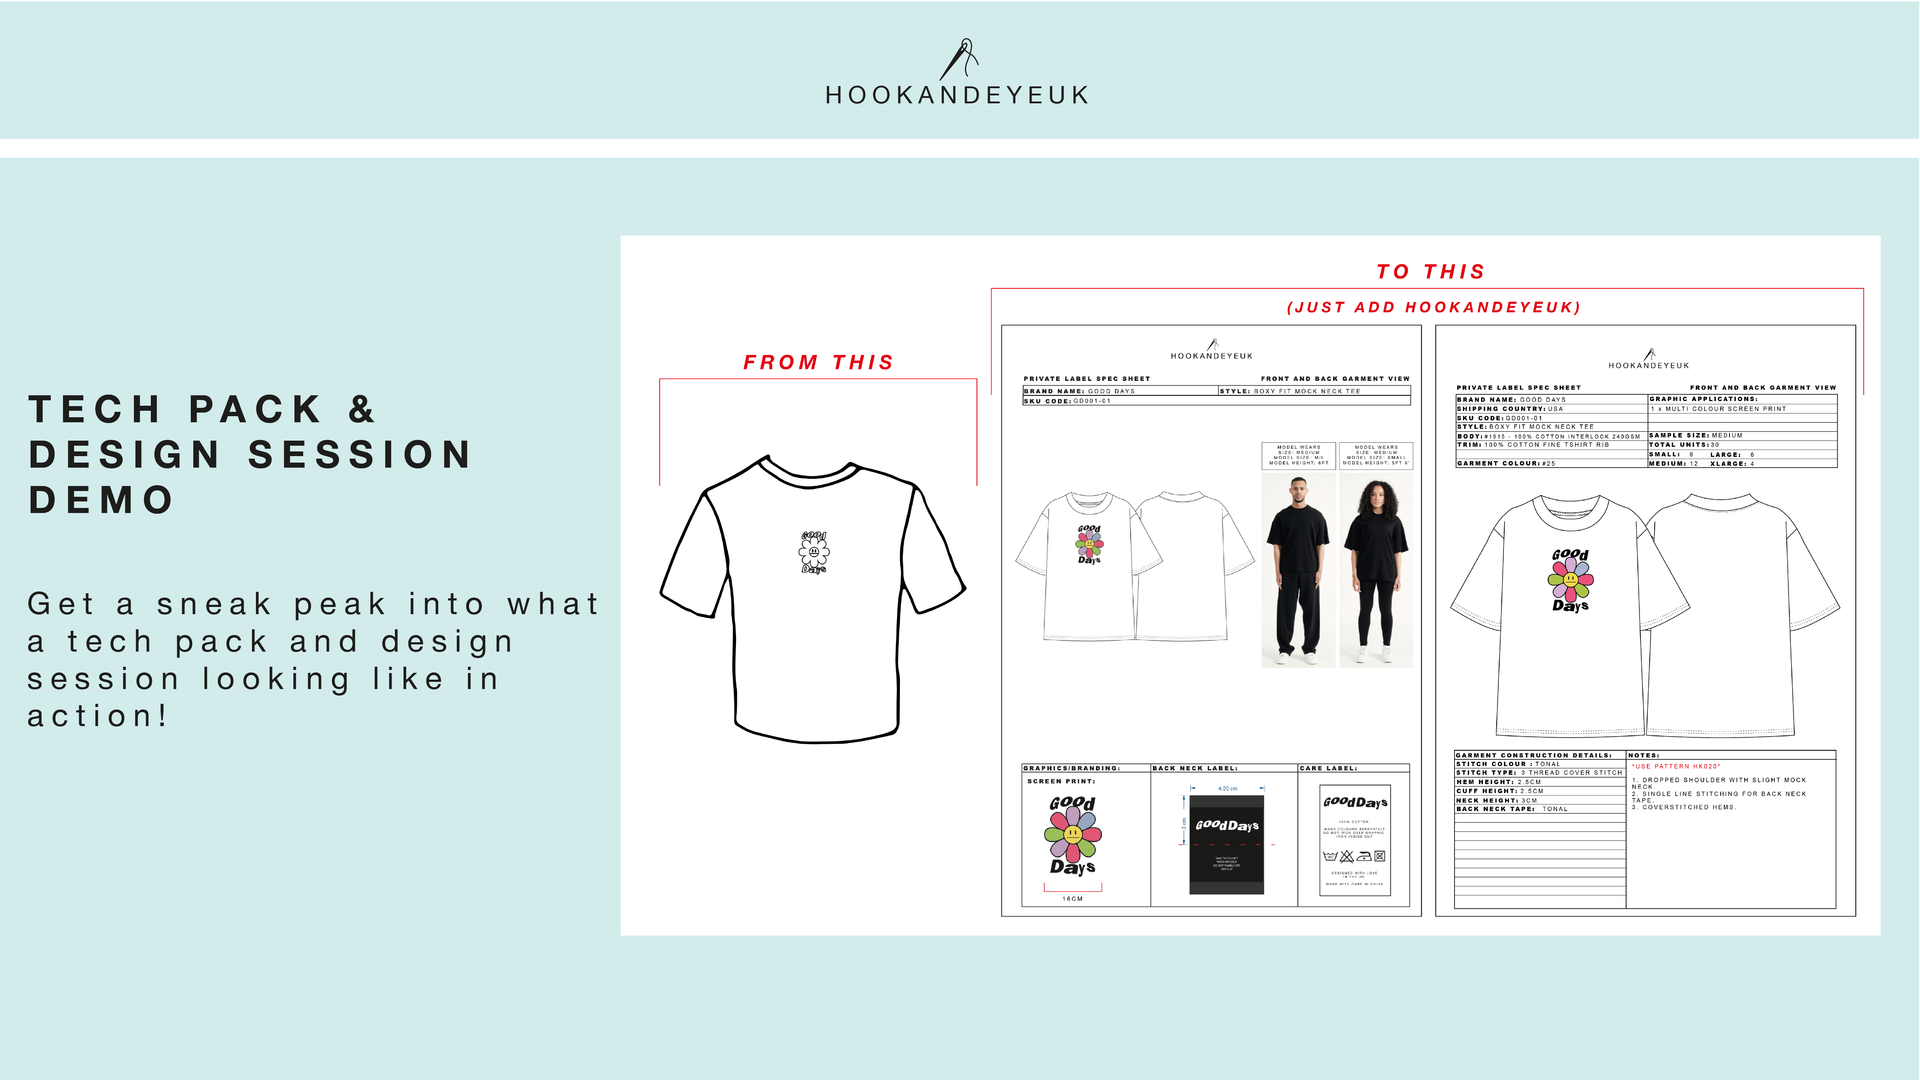 Load video: Video that shows the process of designing a fashion tech pack